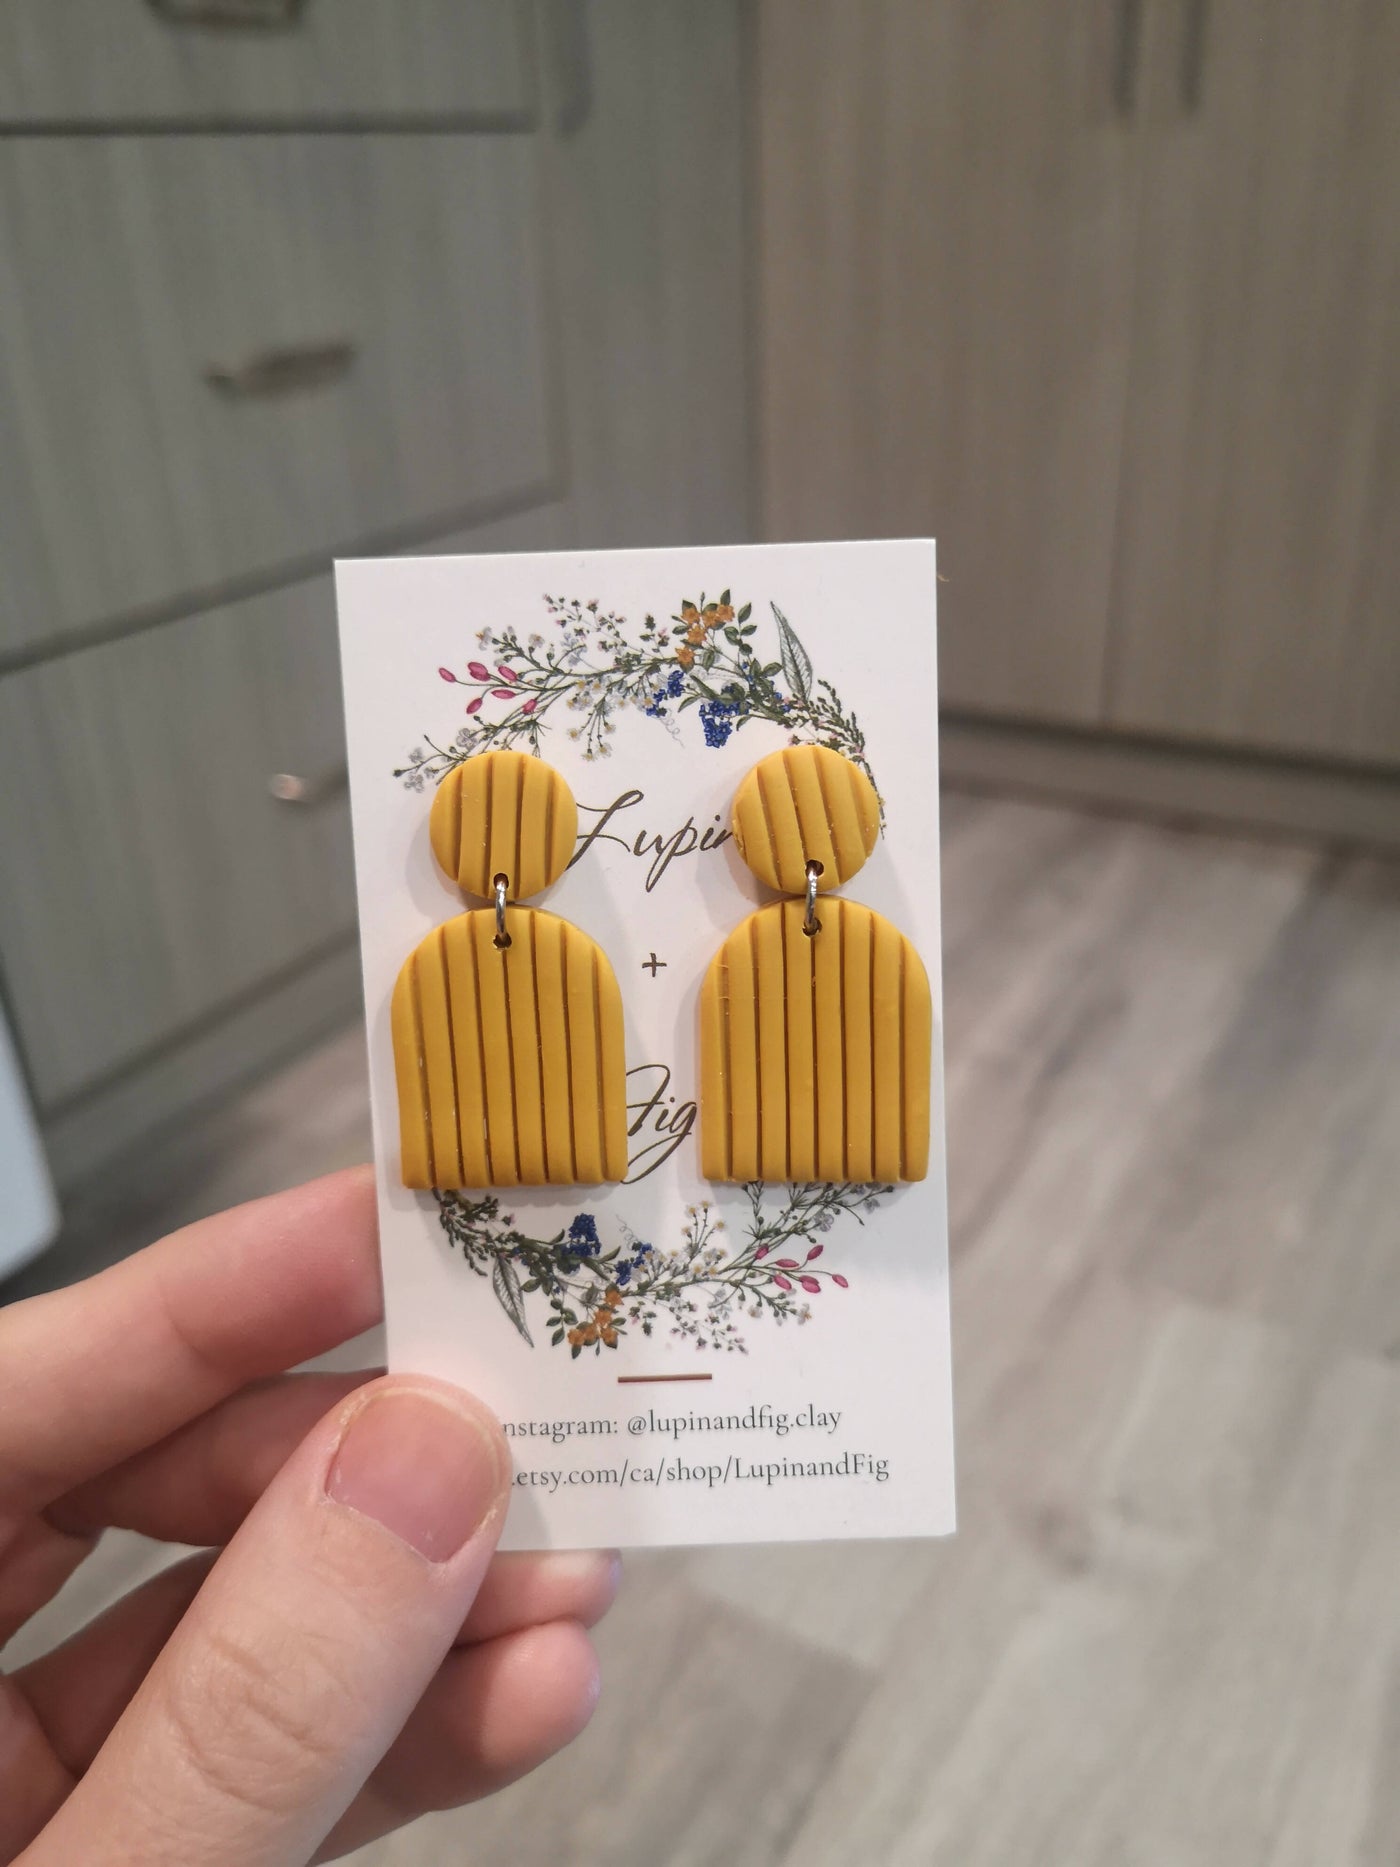 Clay earrings, with lines